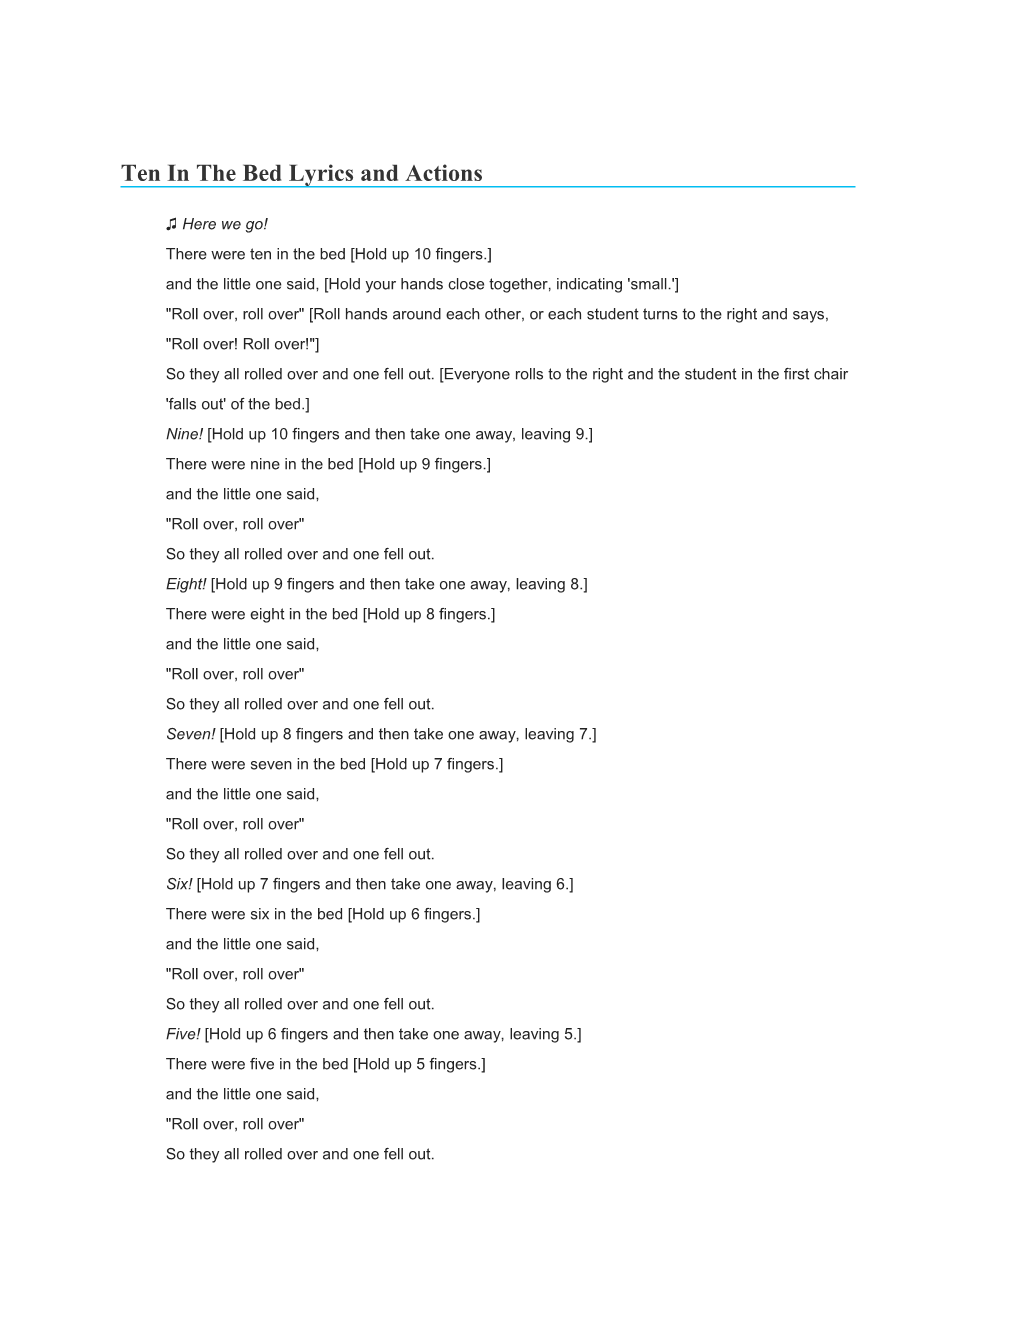 Ten in the Bed Lyrics and Actions